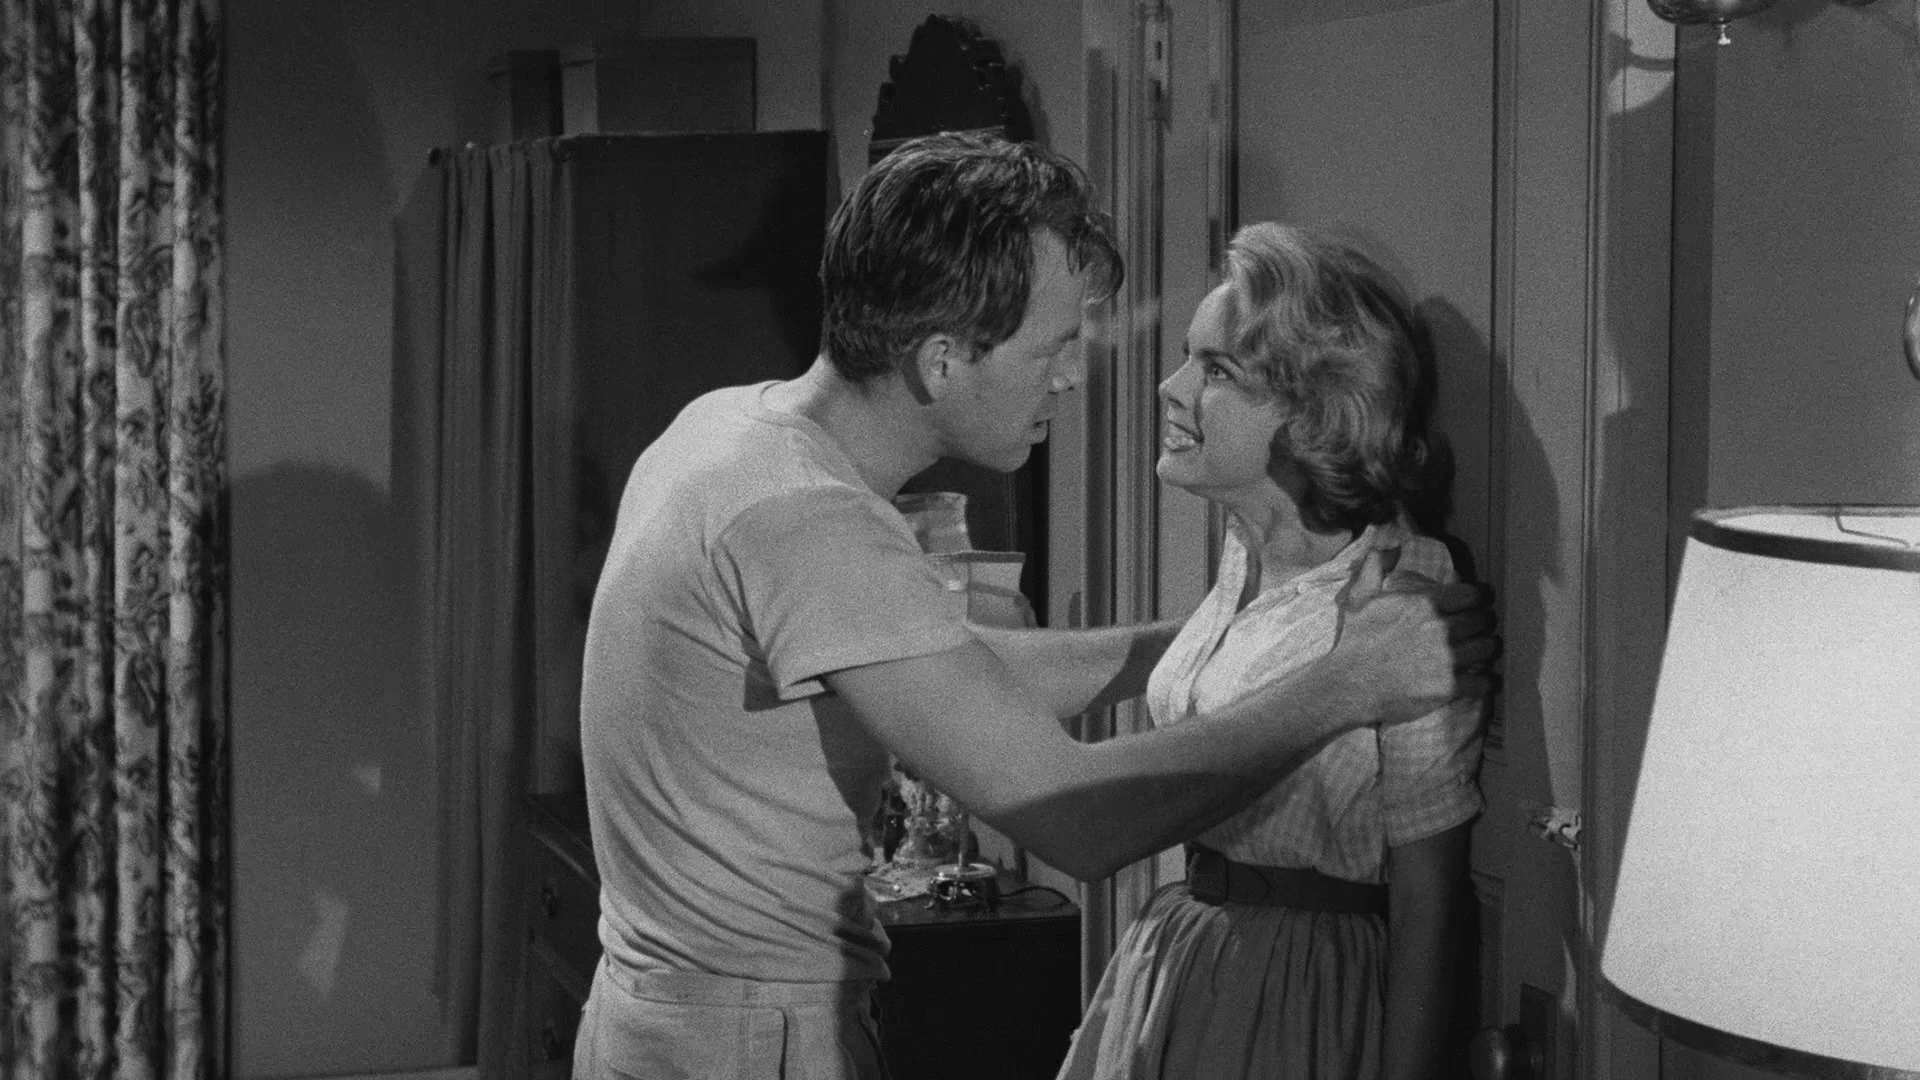 Shack Out on 101 (1955) Screenshot 4 